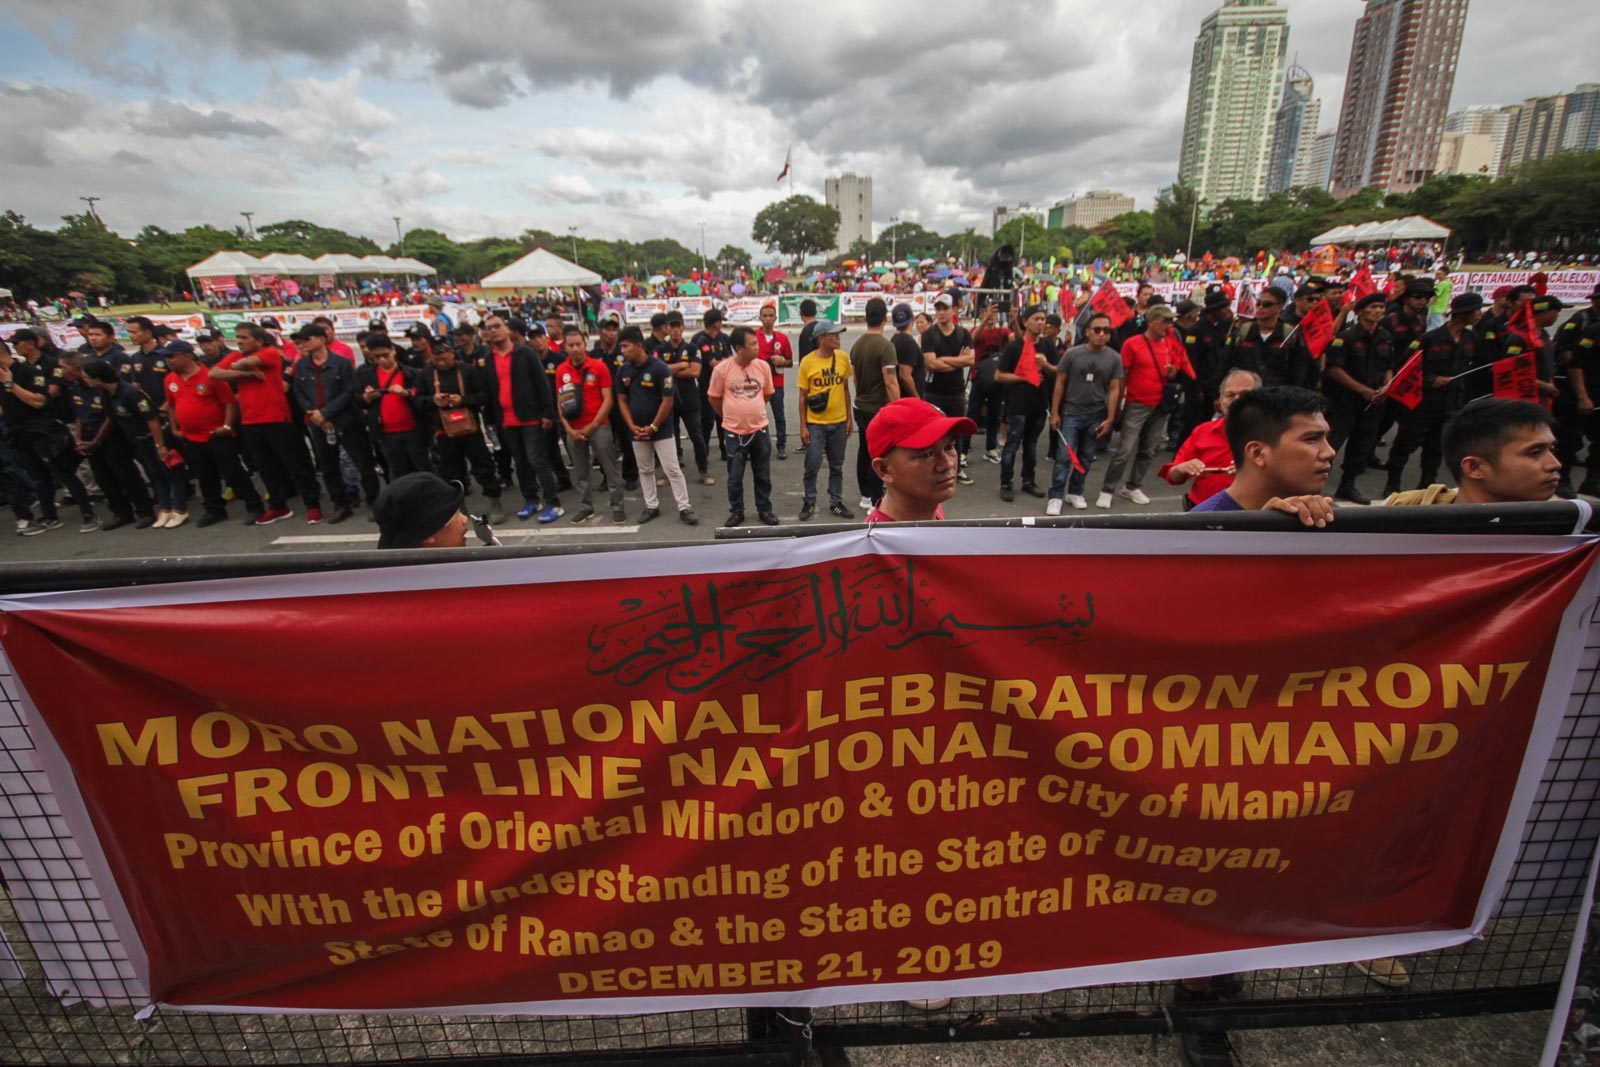 MNLF SUPPORT. The former rebel movement grabs headlines again. Photo by Lito Borras/Rappler 